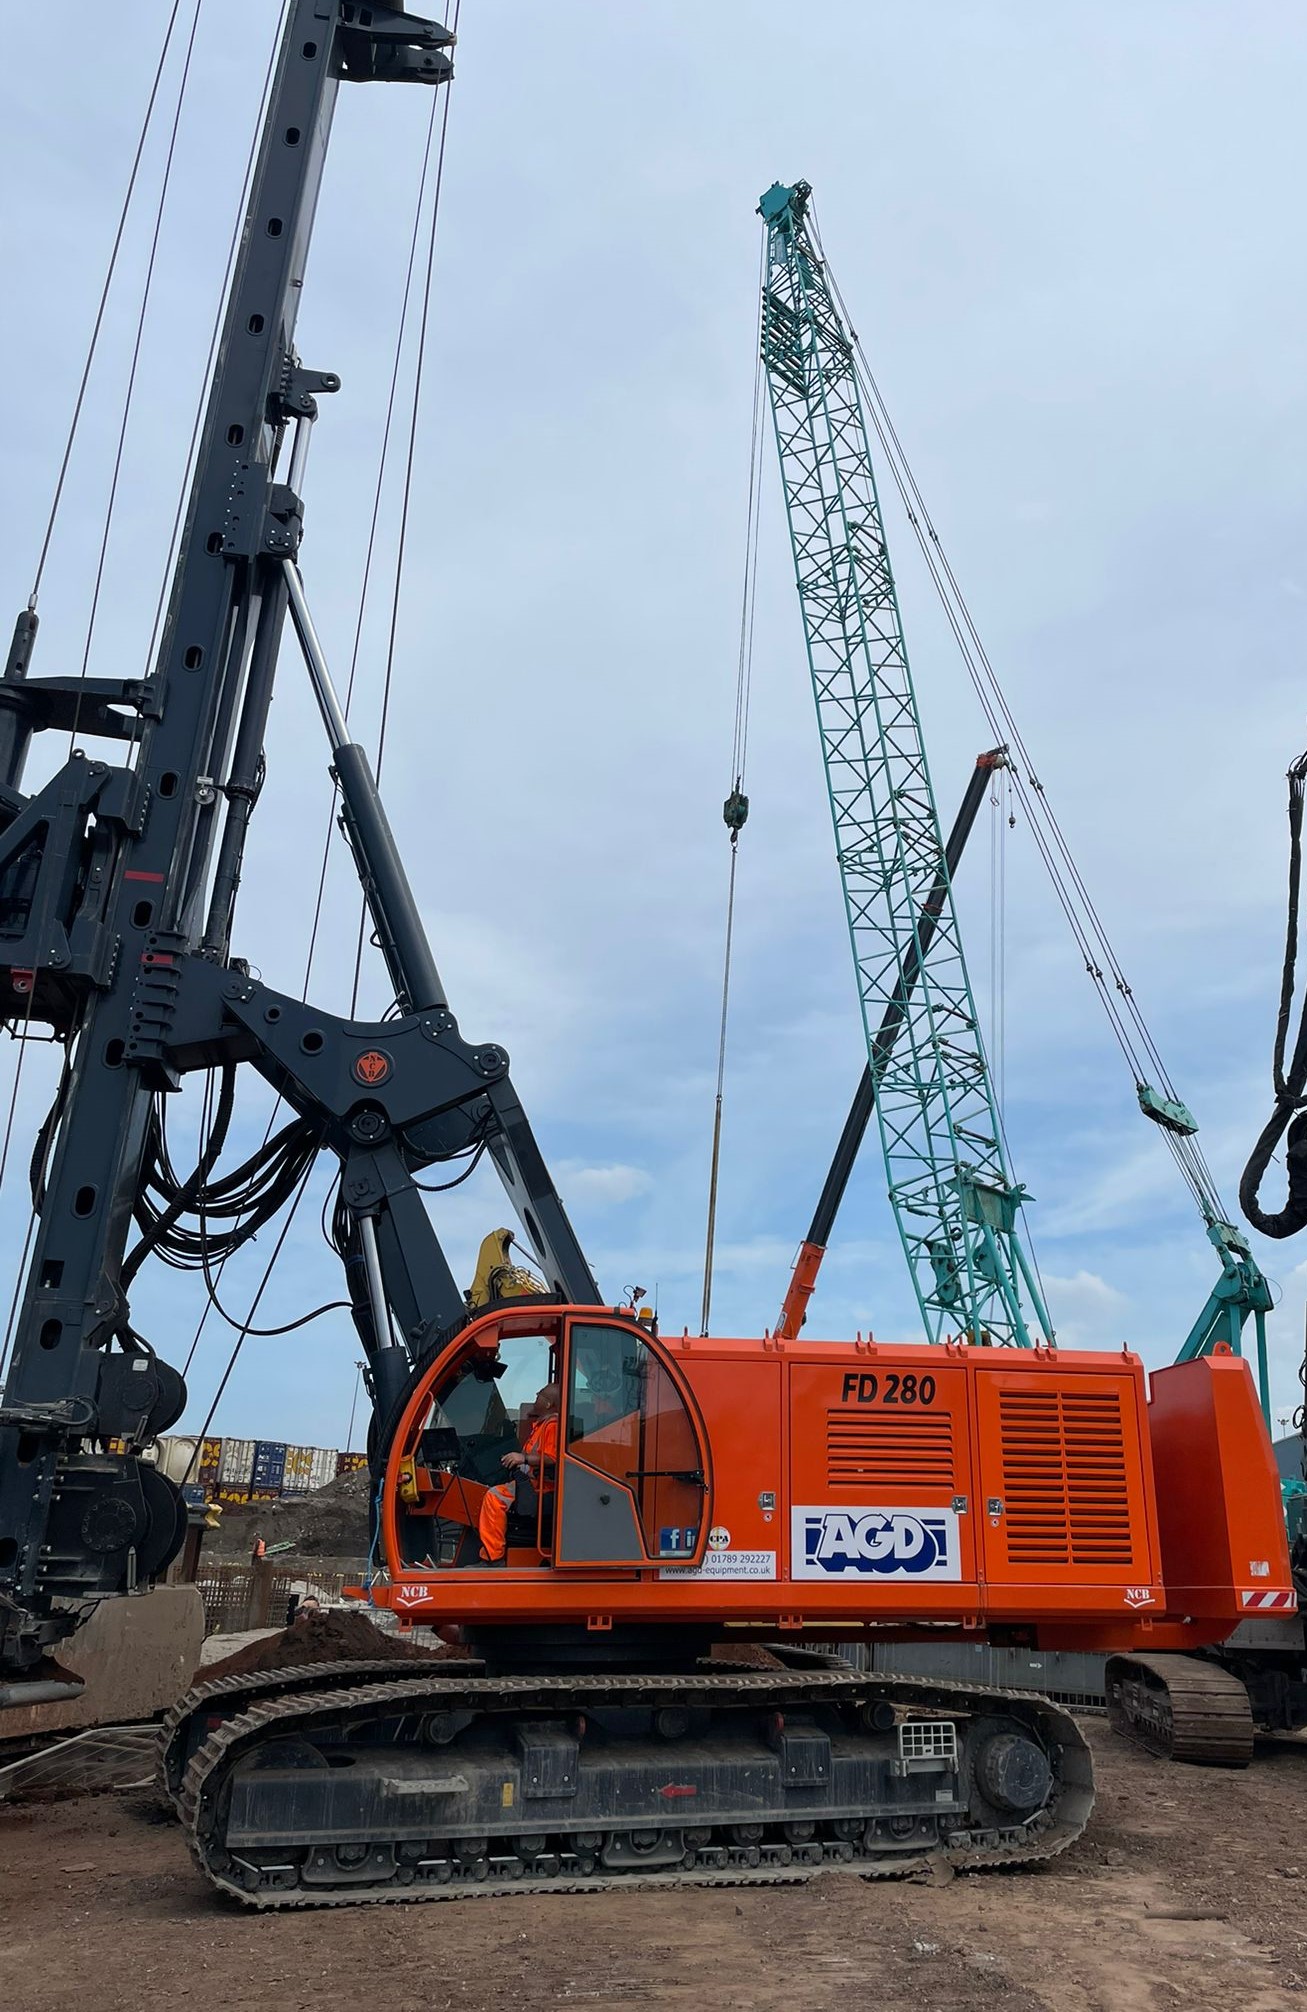 UK Providers of High-Capacity Rotary Piling Rig Hire